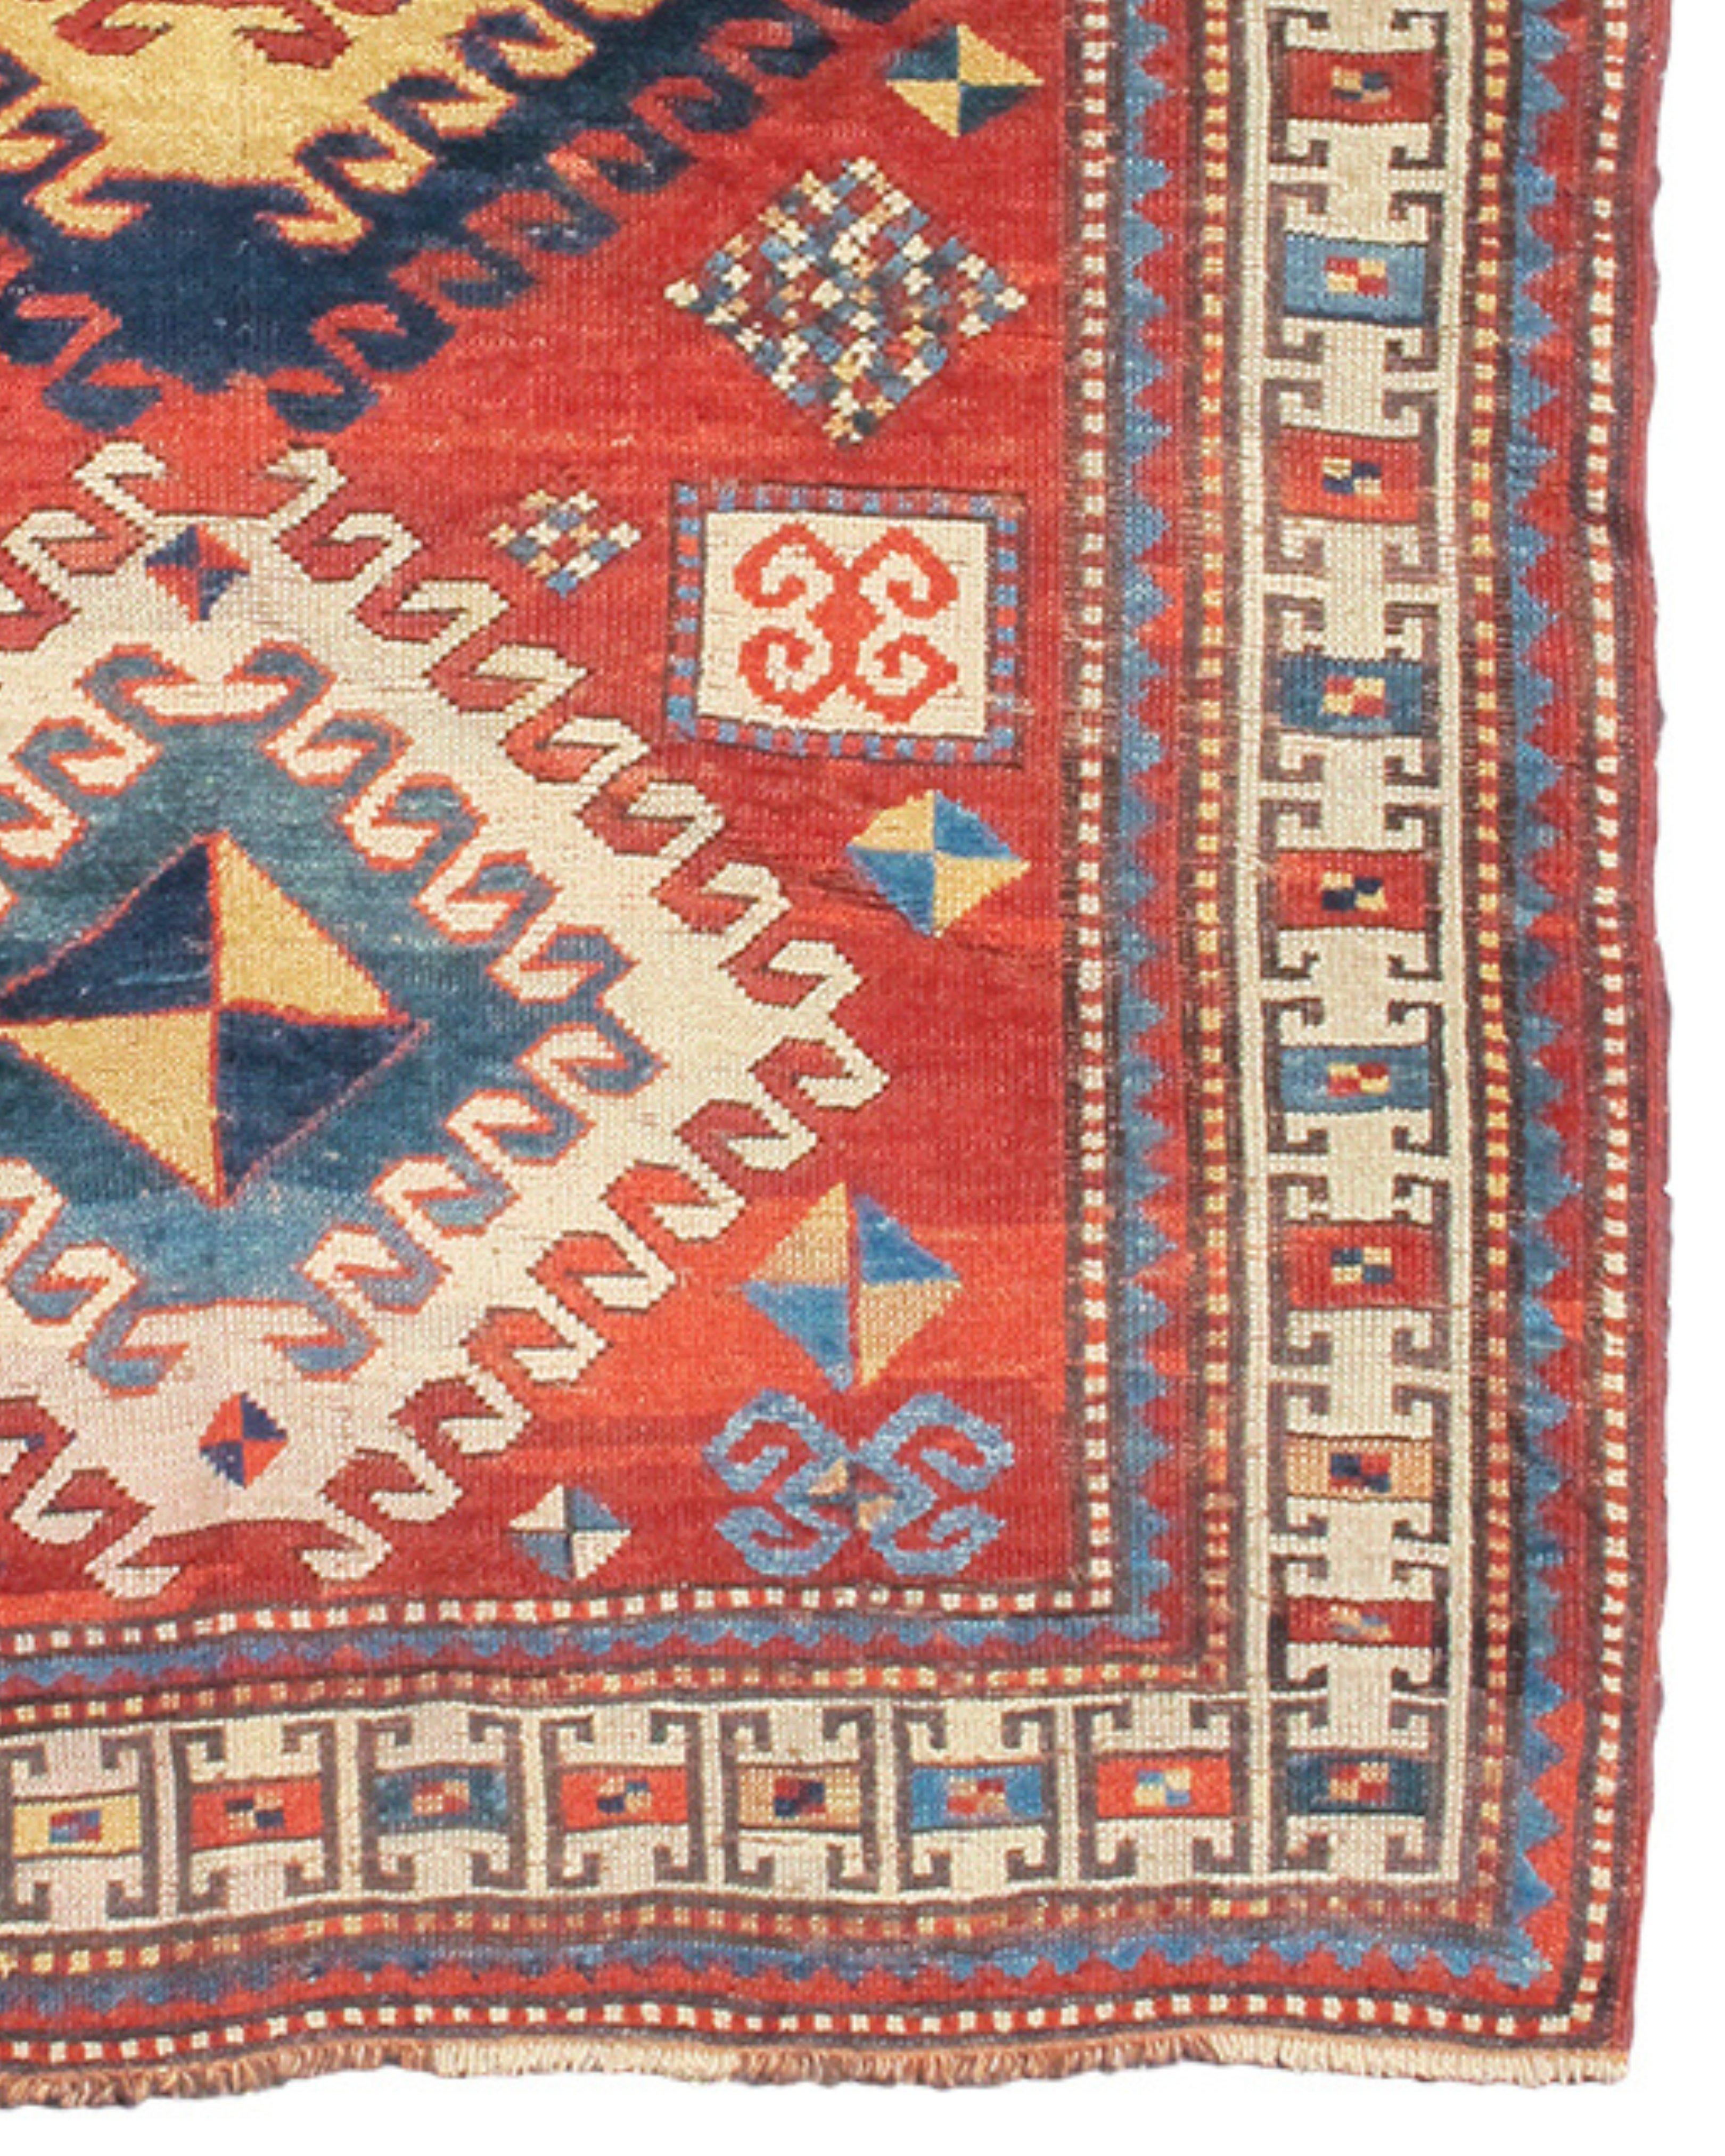 Bordjalu Kazak Rug, Late 19th Century In Excellent Condition For Sale In San Francisco, CA